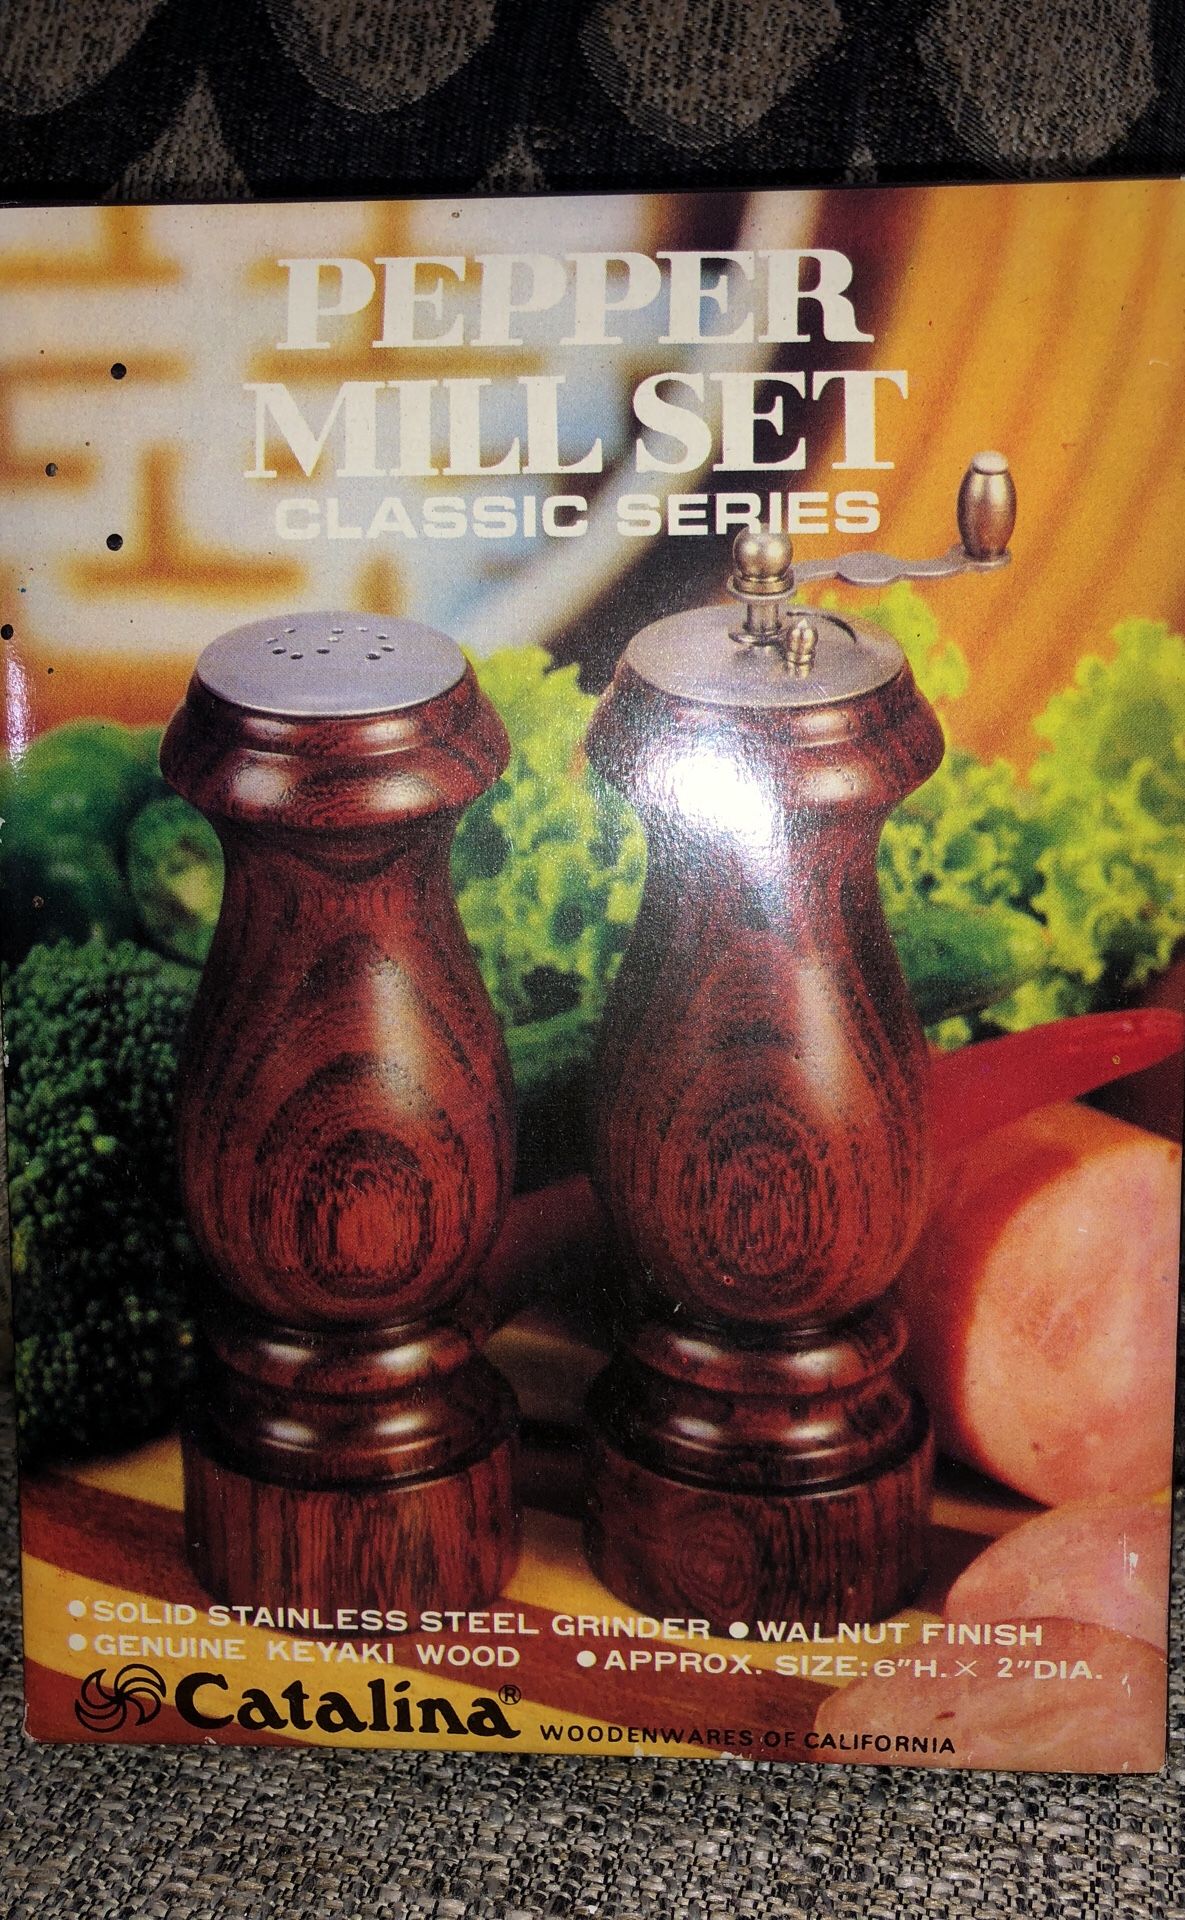 Pepper Mill Set Classic Series . Please see all the pictures and read the description